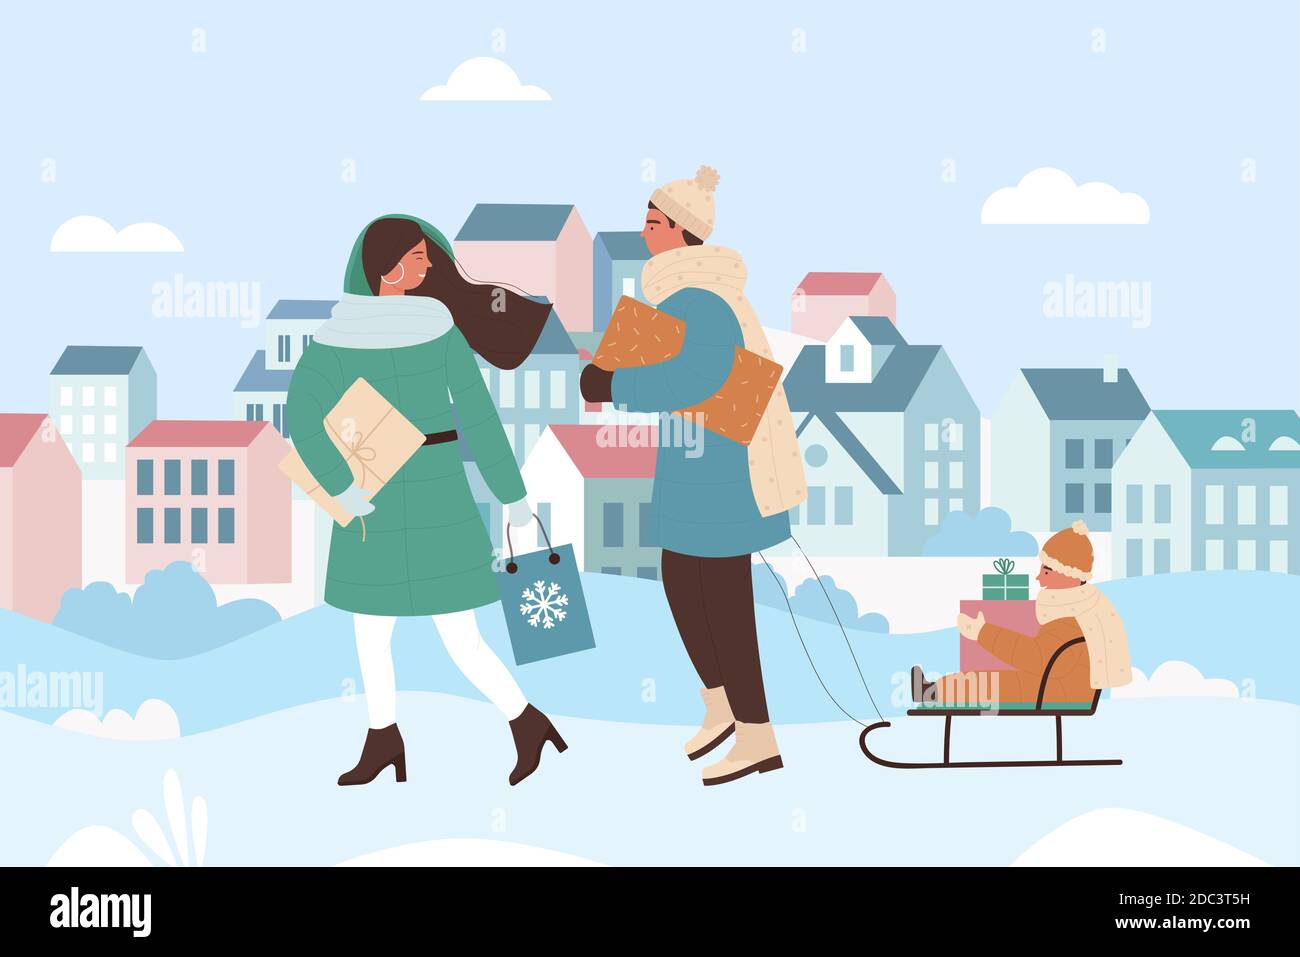 Family people walk in urban Christmas winter city landscape vector illustration. Cartoon snow cityscape with walking and sledding mother, father and child characters, holding xmas gifts background Stock Vector